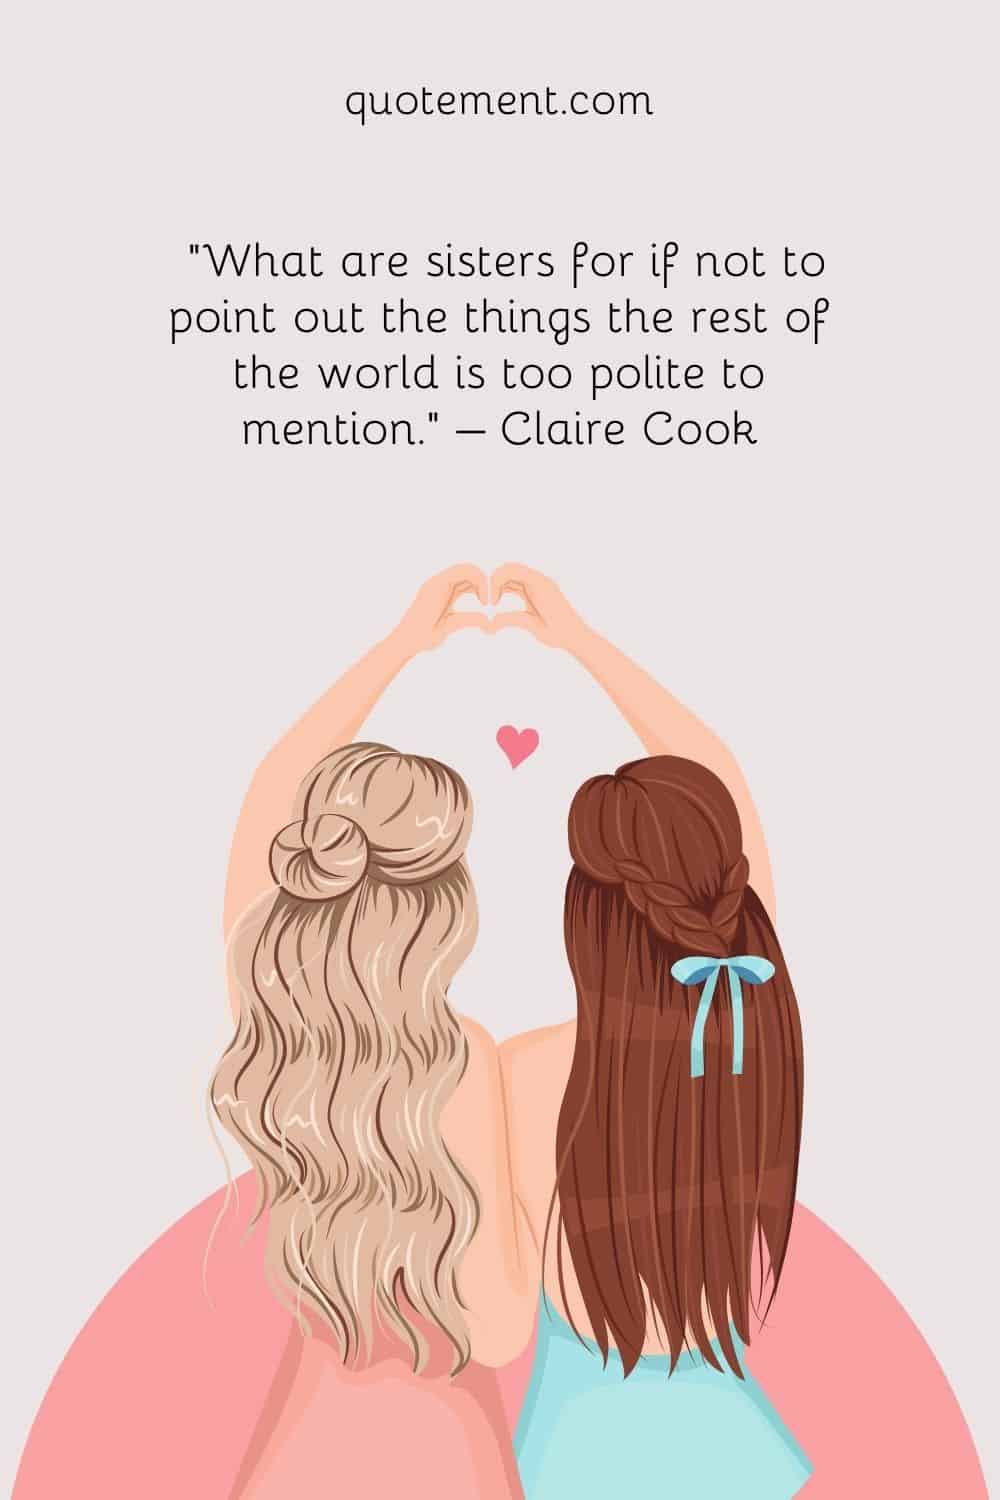 “What are sisters for if not to point out the things the rest of the world is too polite to mention.” – Claire Cook